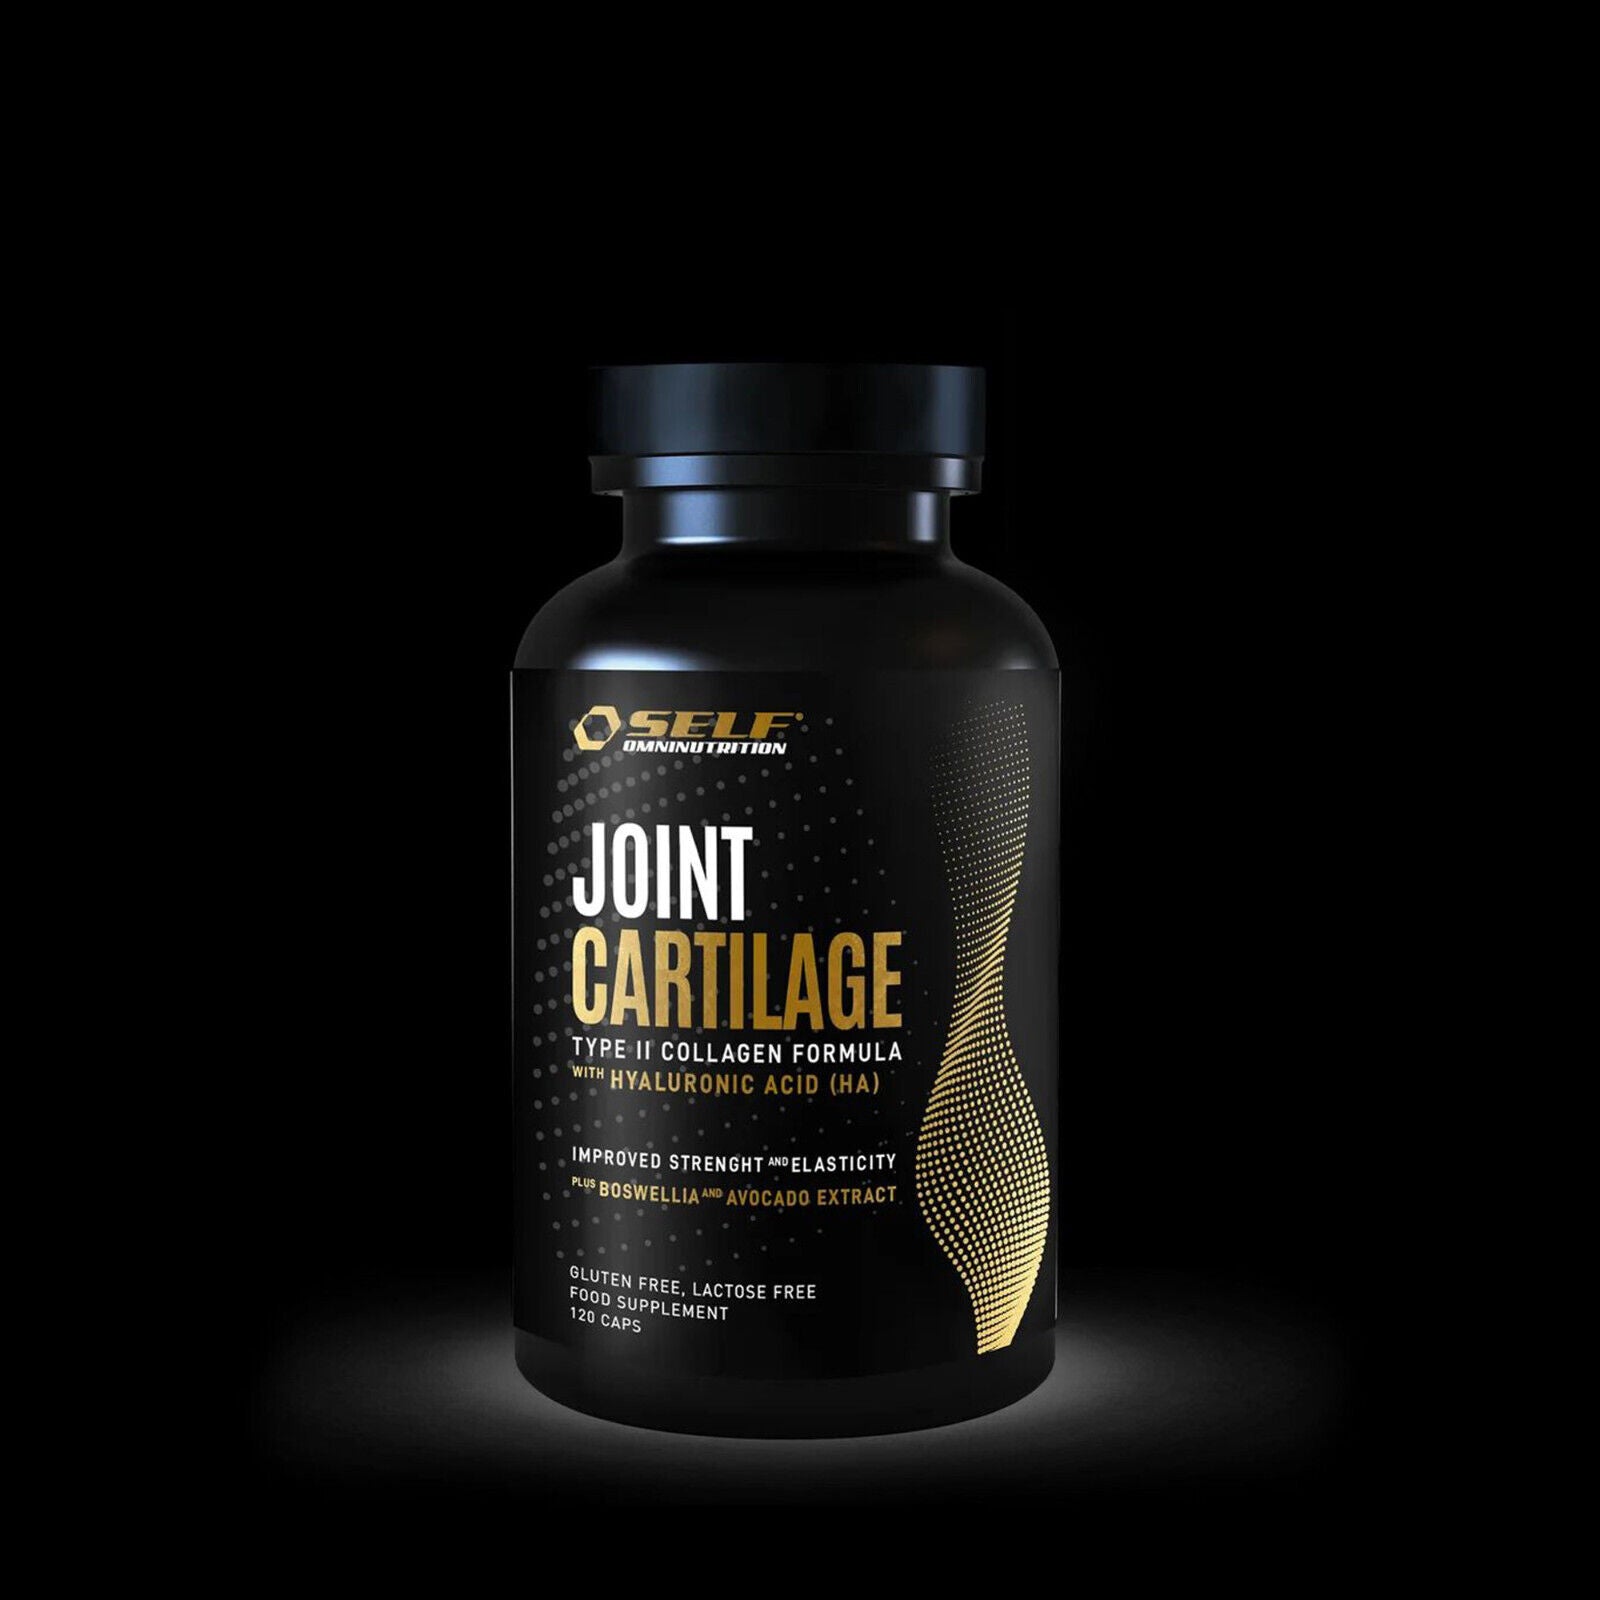 self-omninutrition-joint-cartilage-collagene-acido-ialuronico